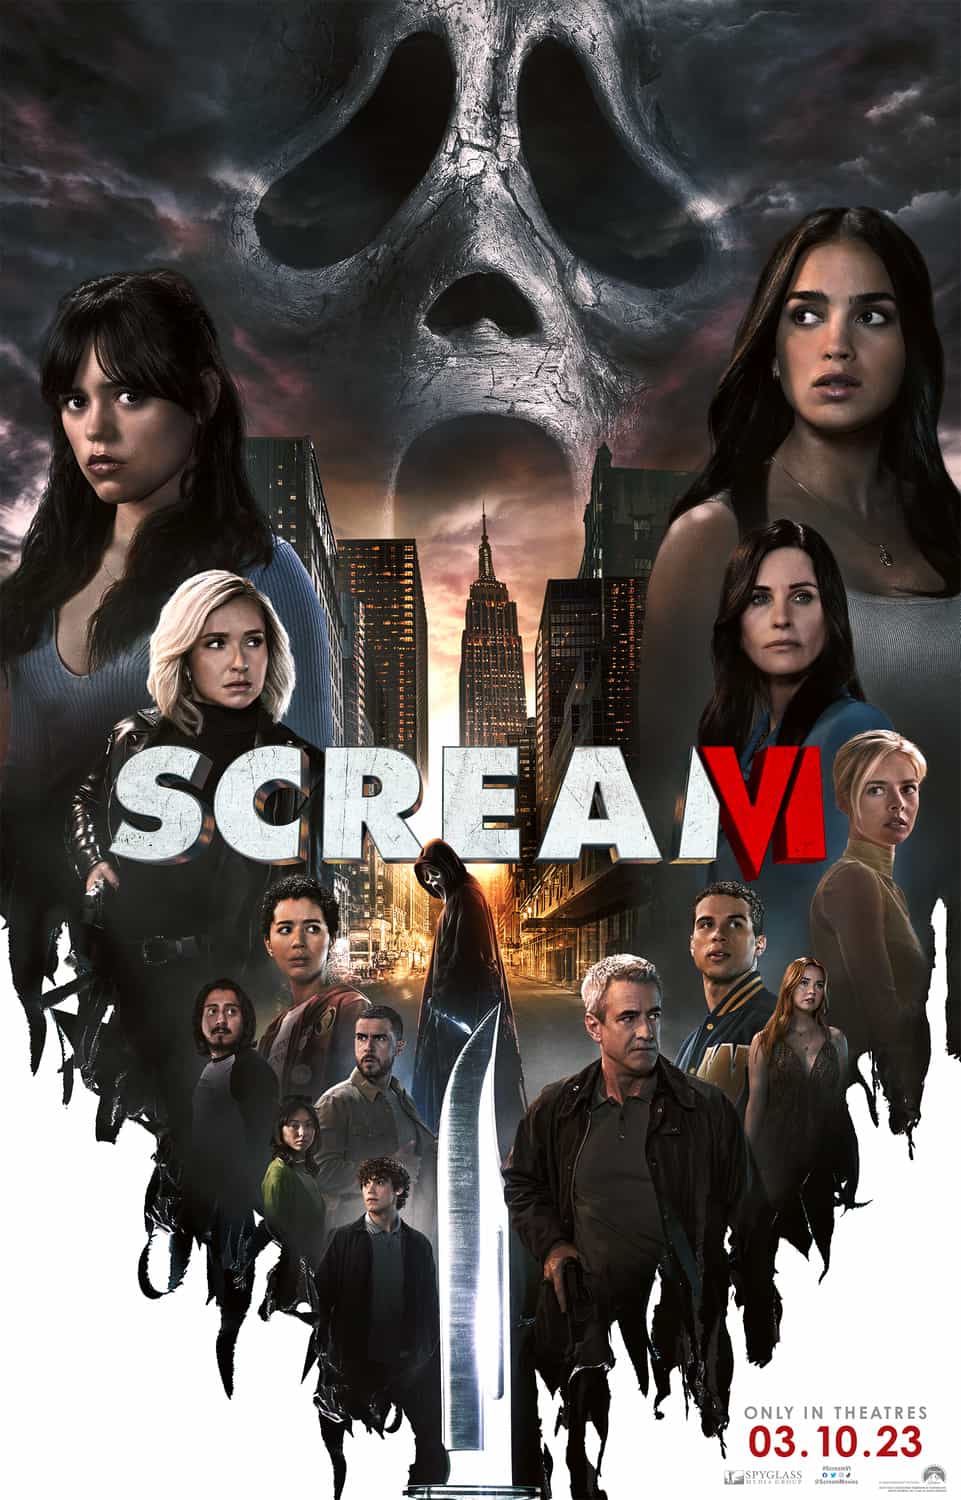 Global Box Office Weekend Report 10th - 12th March 2023:  Scream Vi makes its global box office debut as the top global movie with a $67 Million opening
